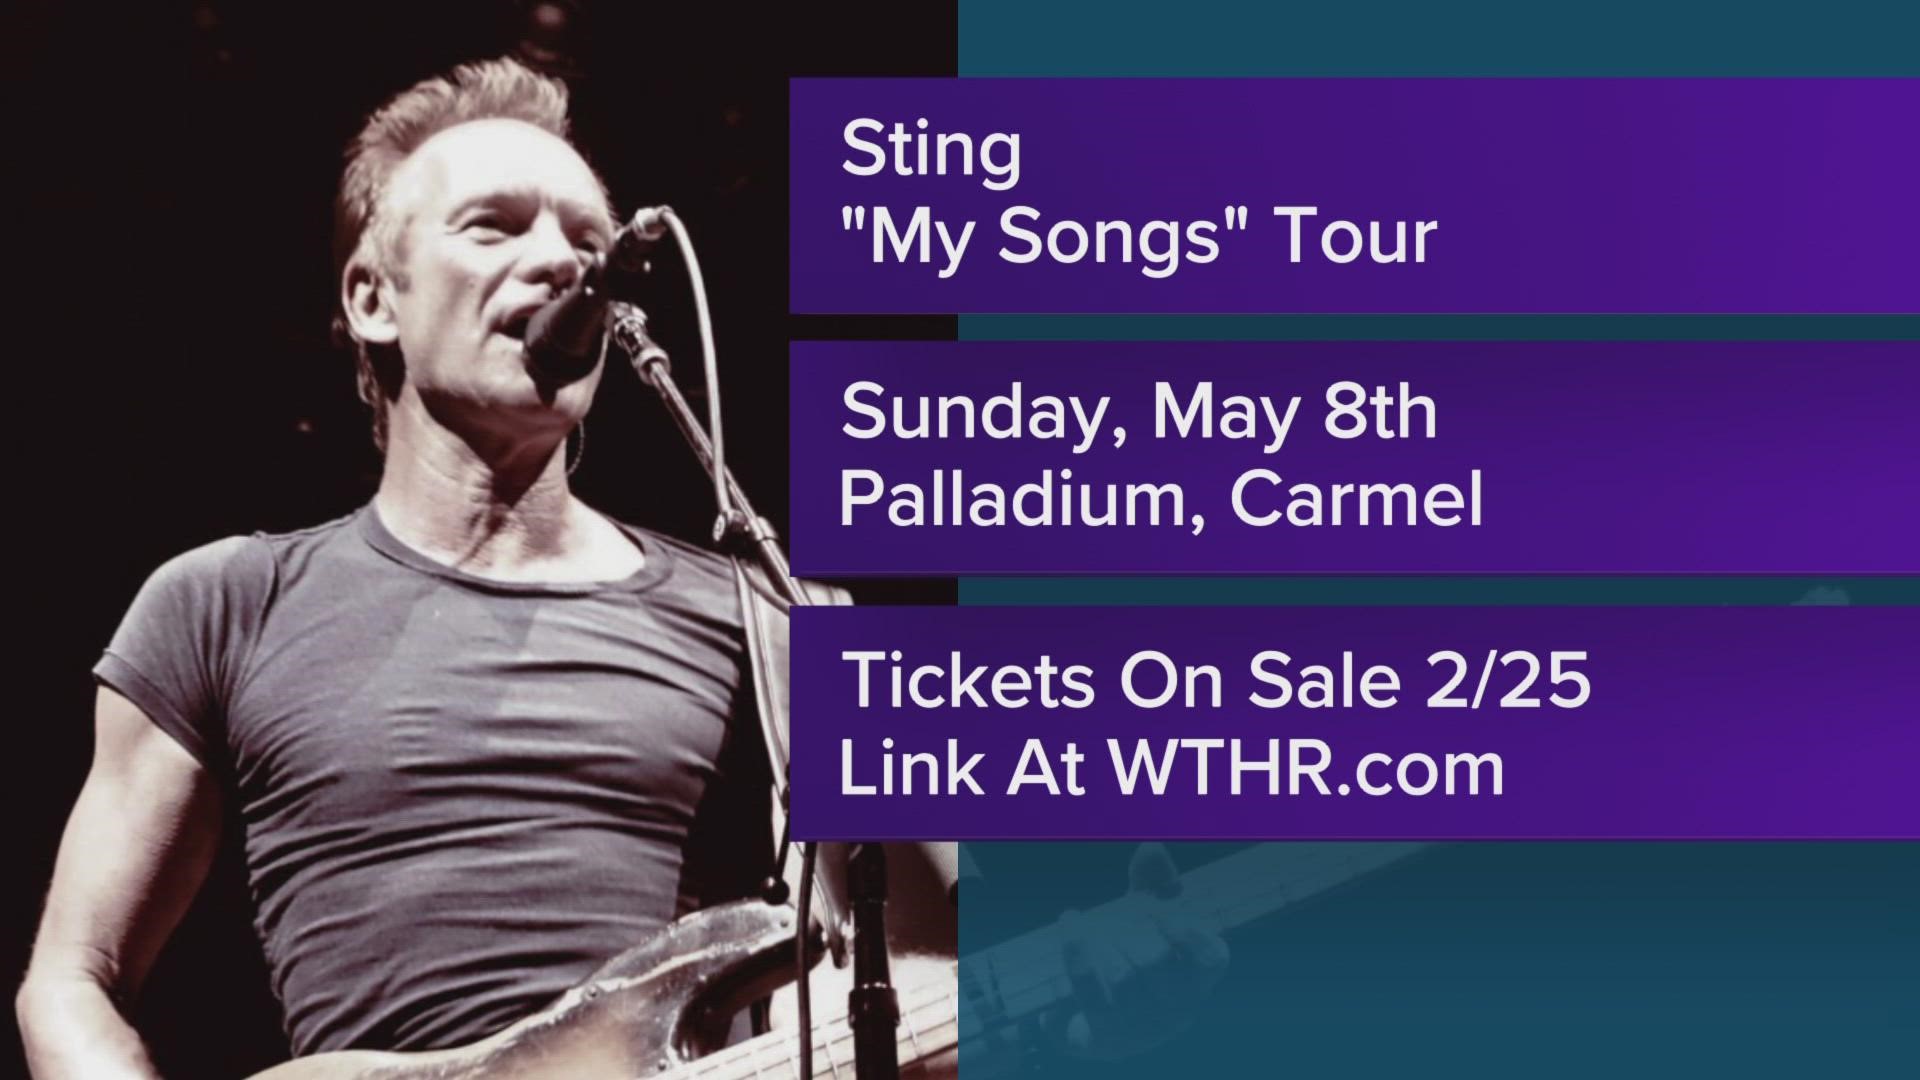 Sting will sing at the Carmel palladium in May.